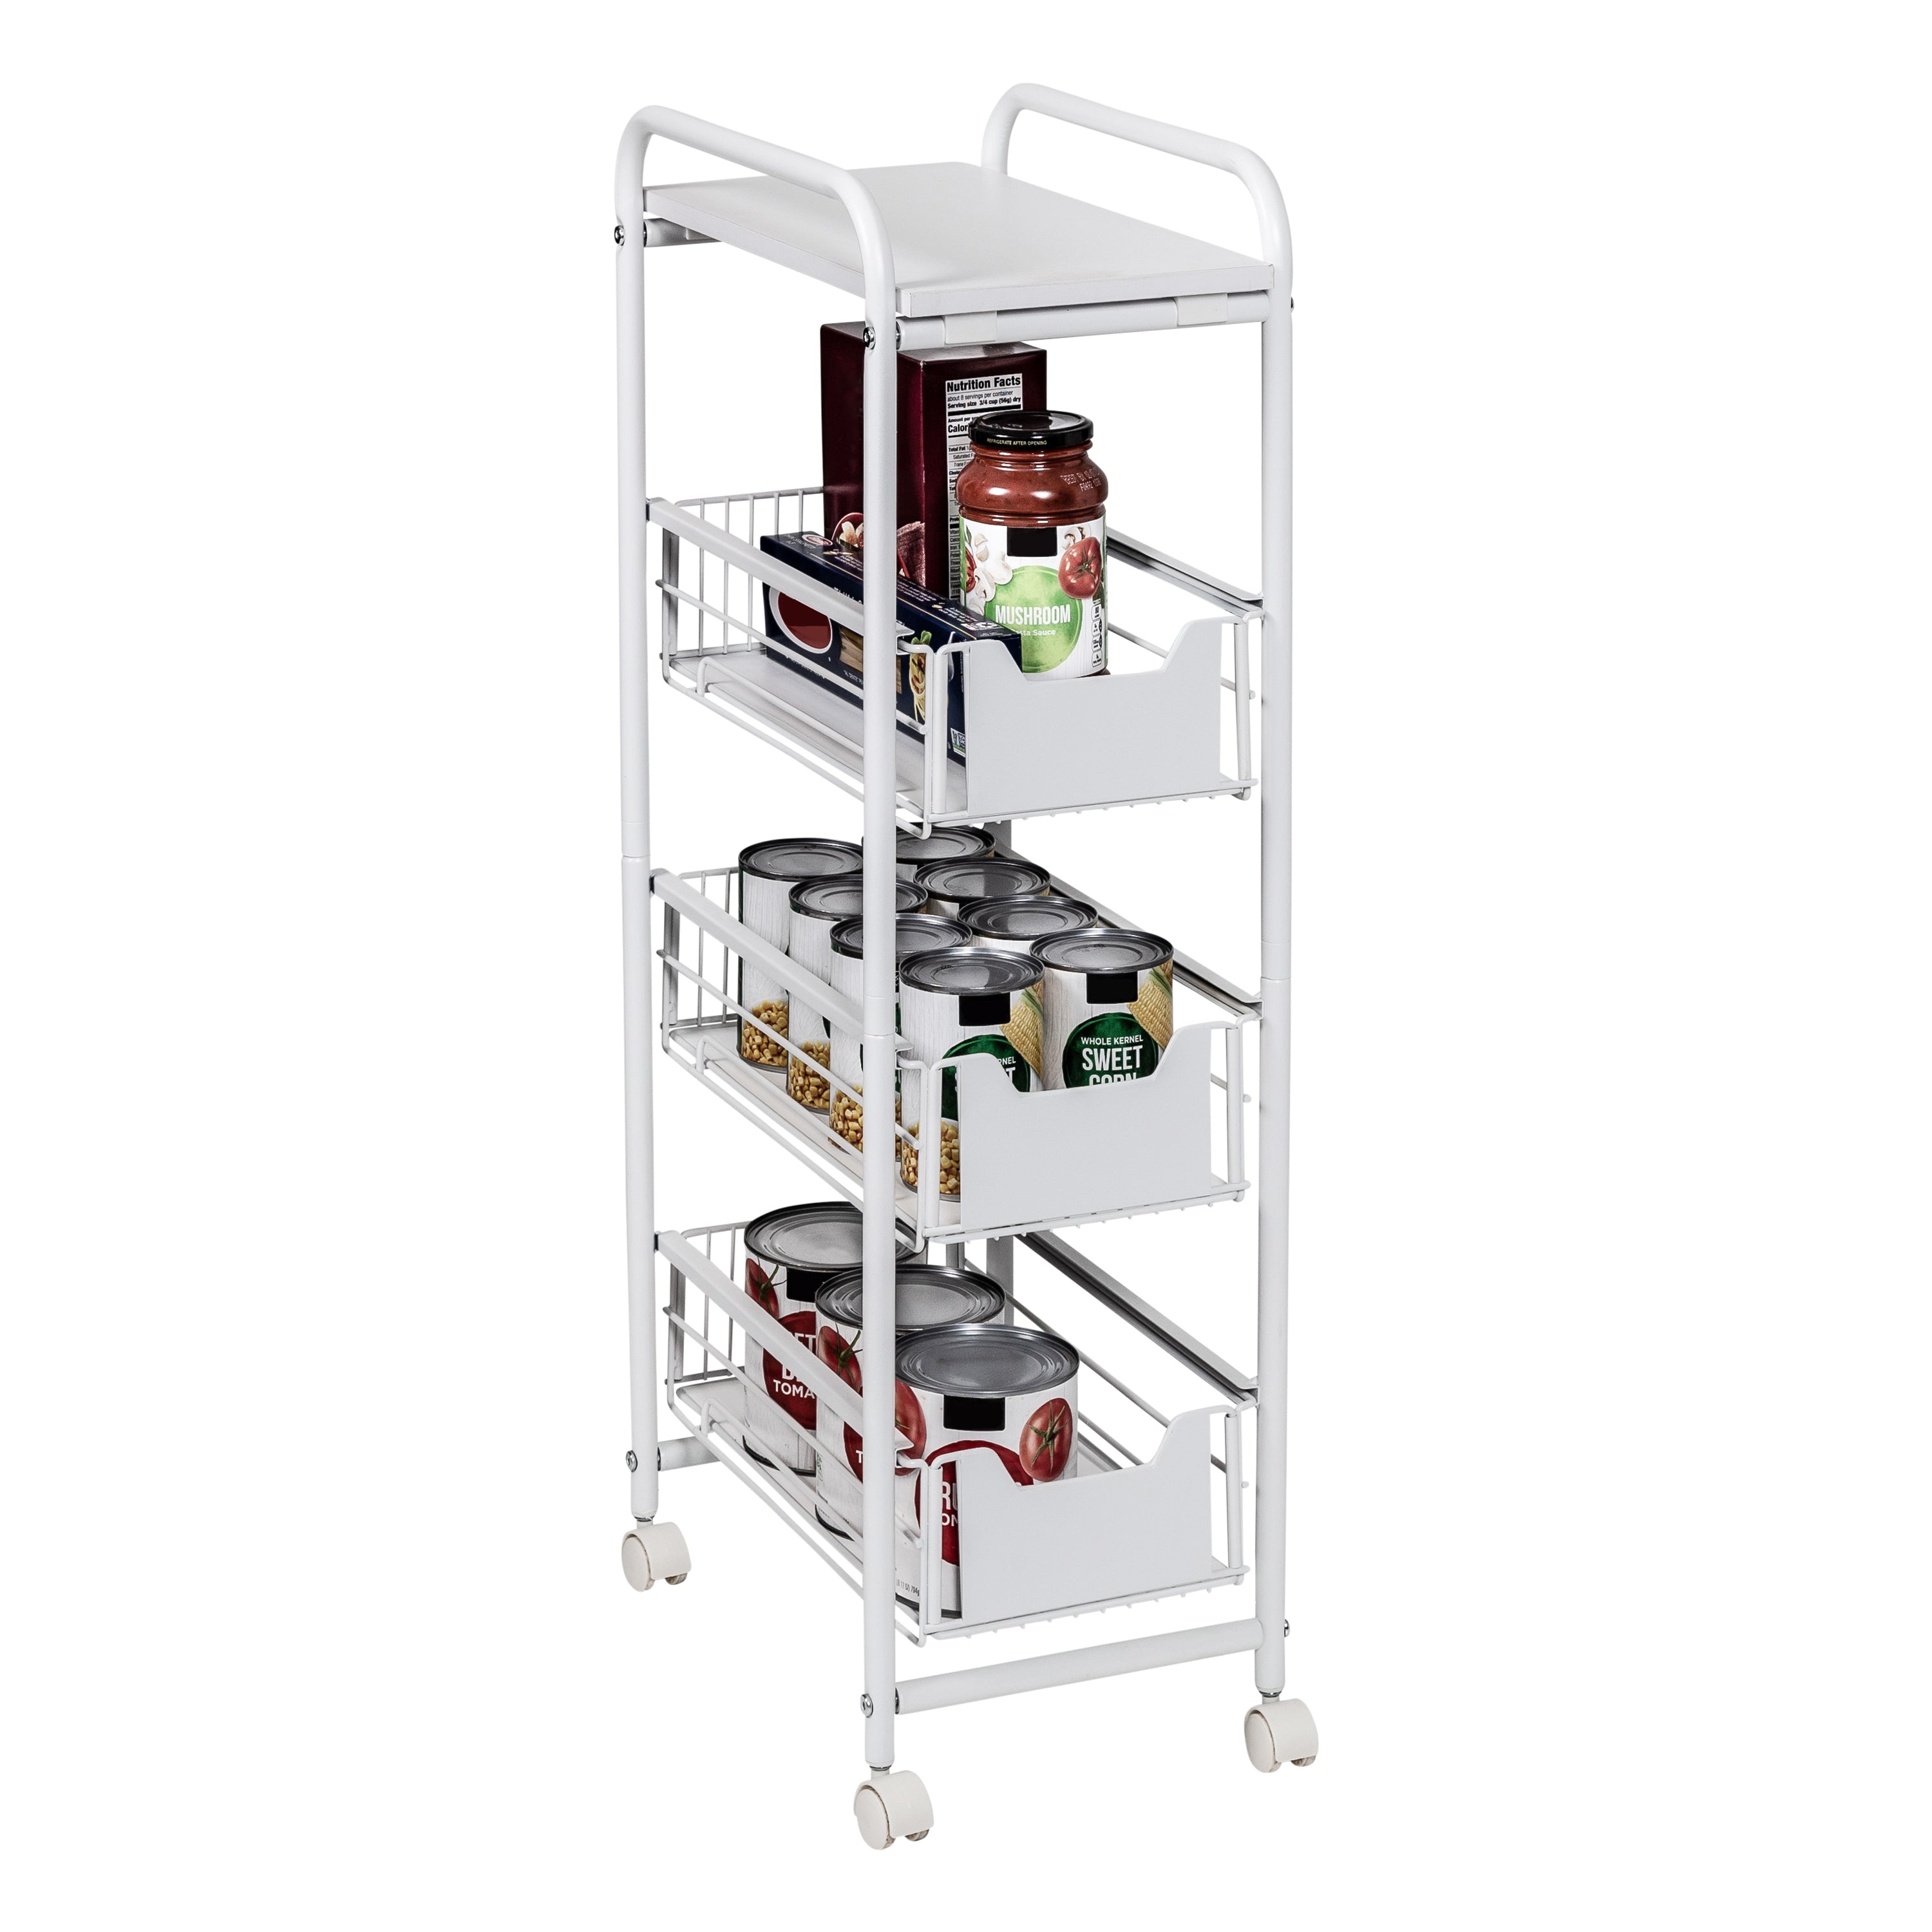 3 Tier Carts & Accessories - 3 Shelf Carts for Kitchen, Bathroom, Office &  More